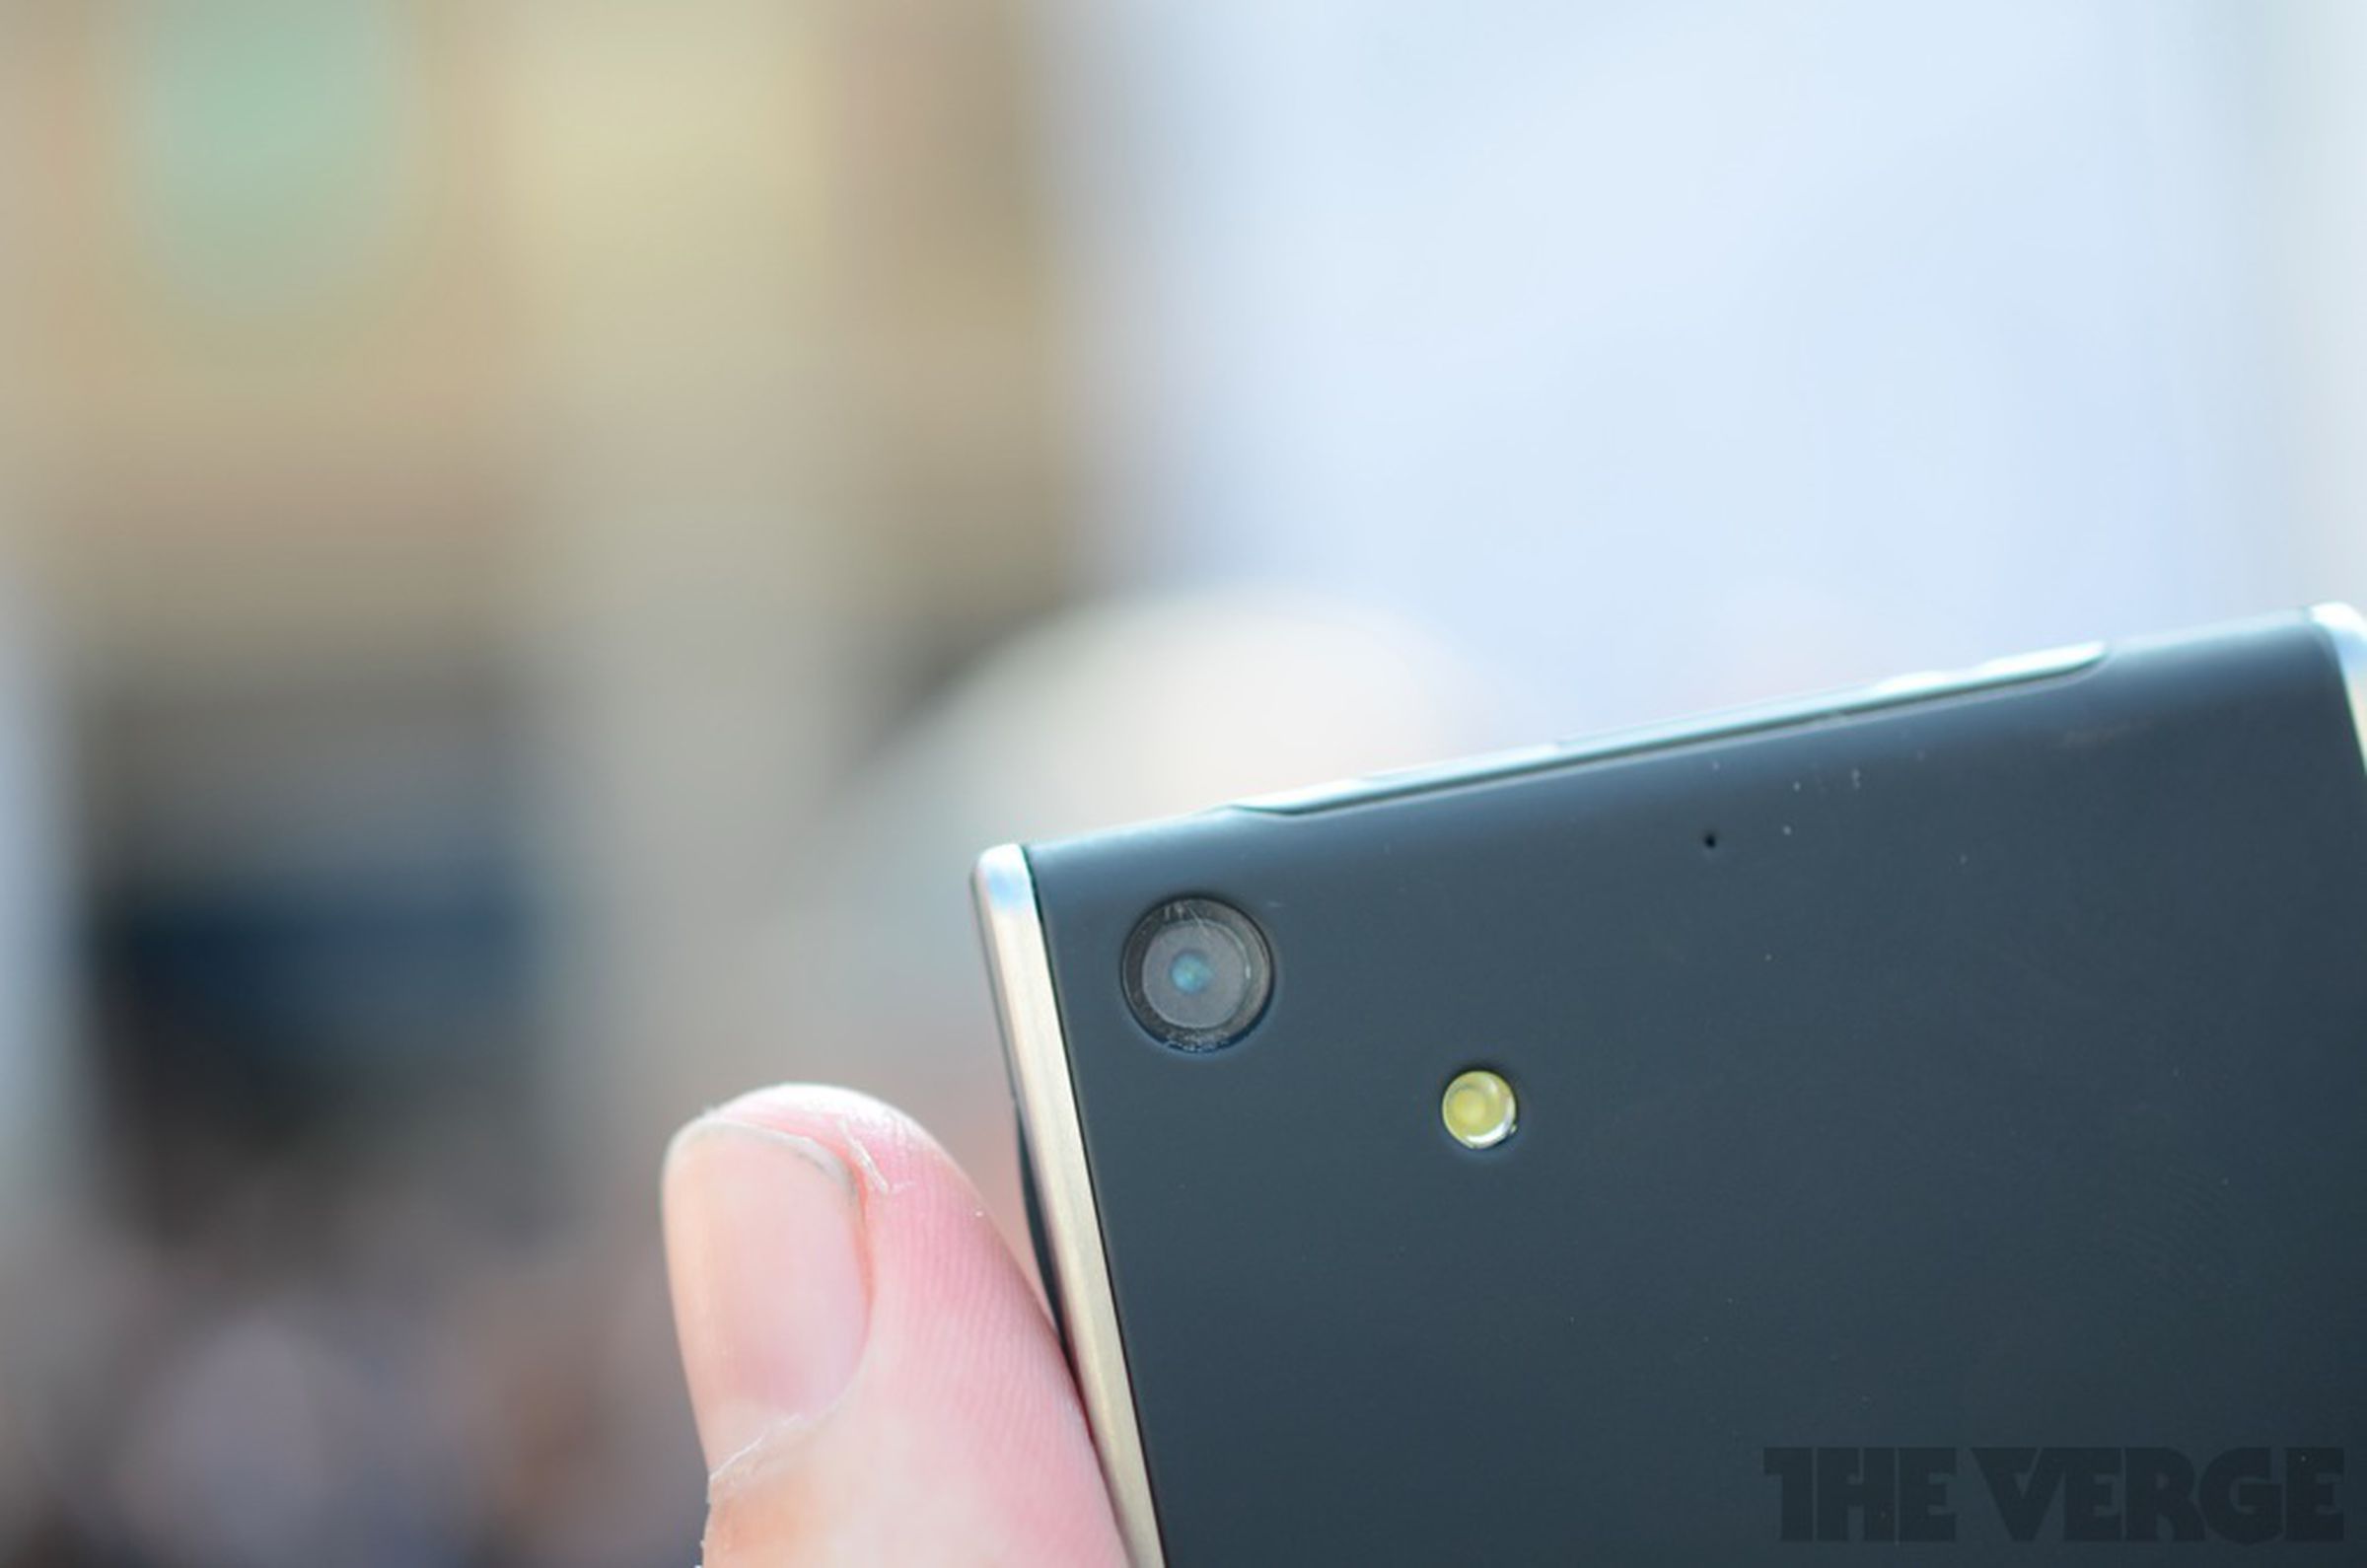 Lumigon T2 hands-on pictures